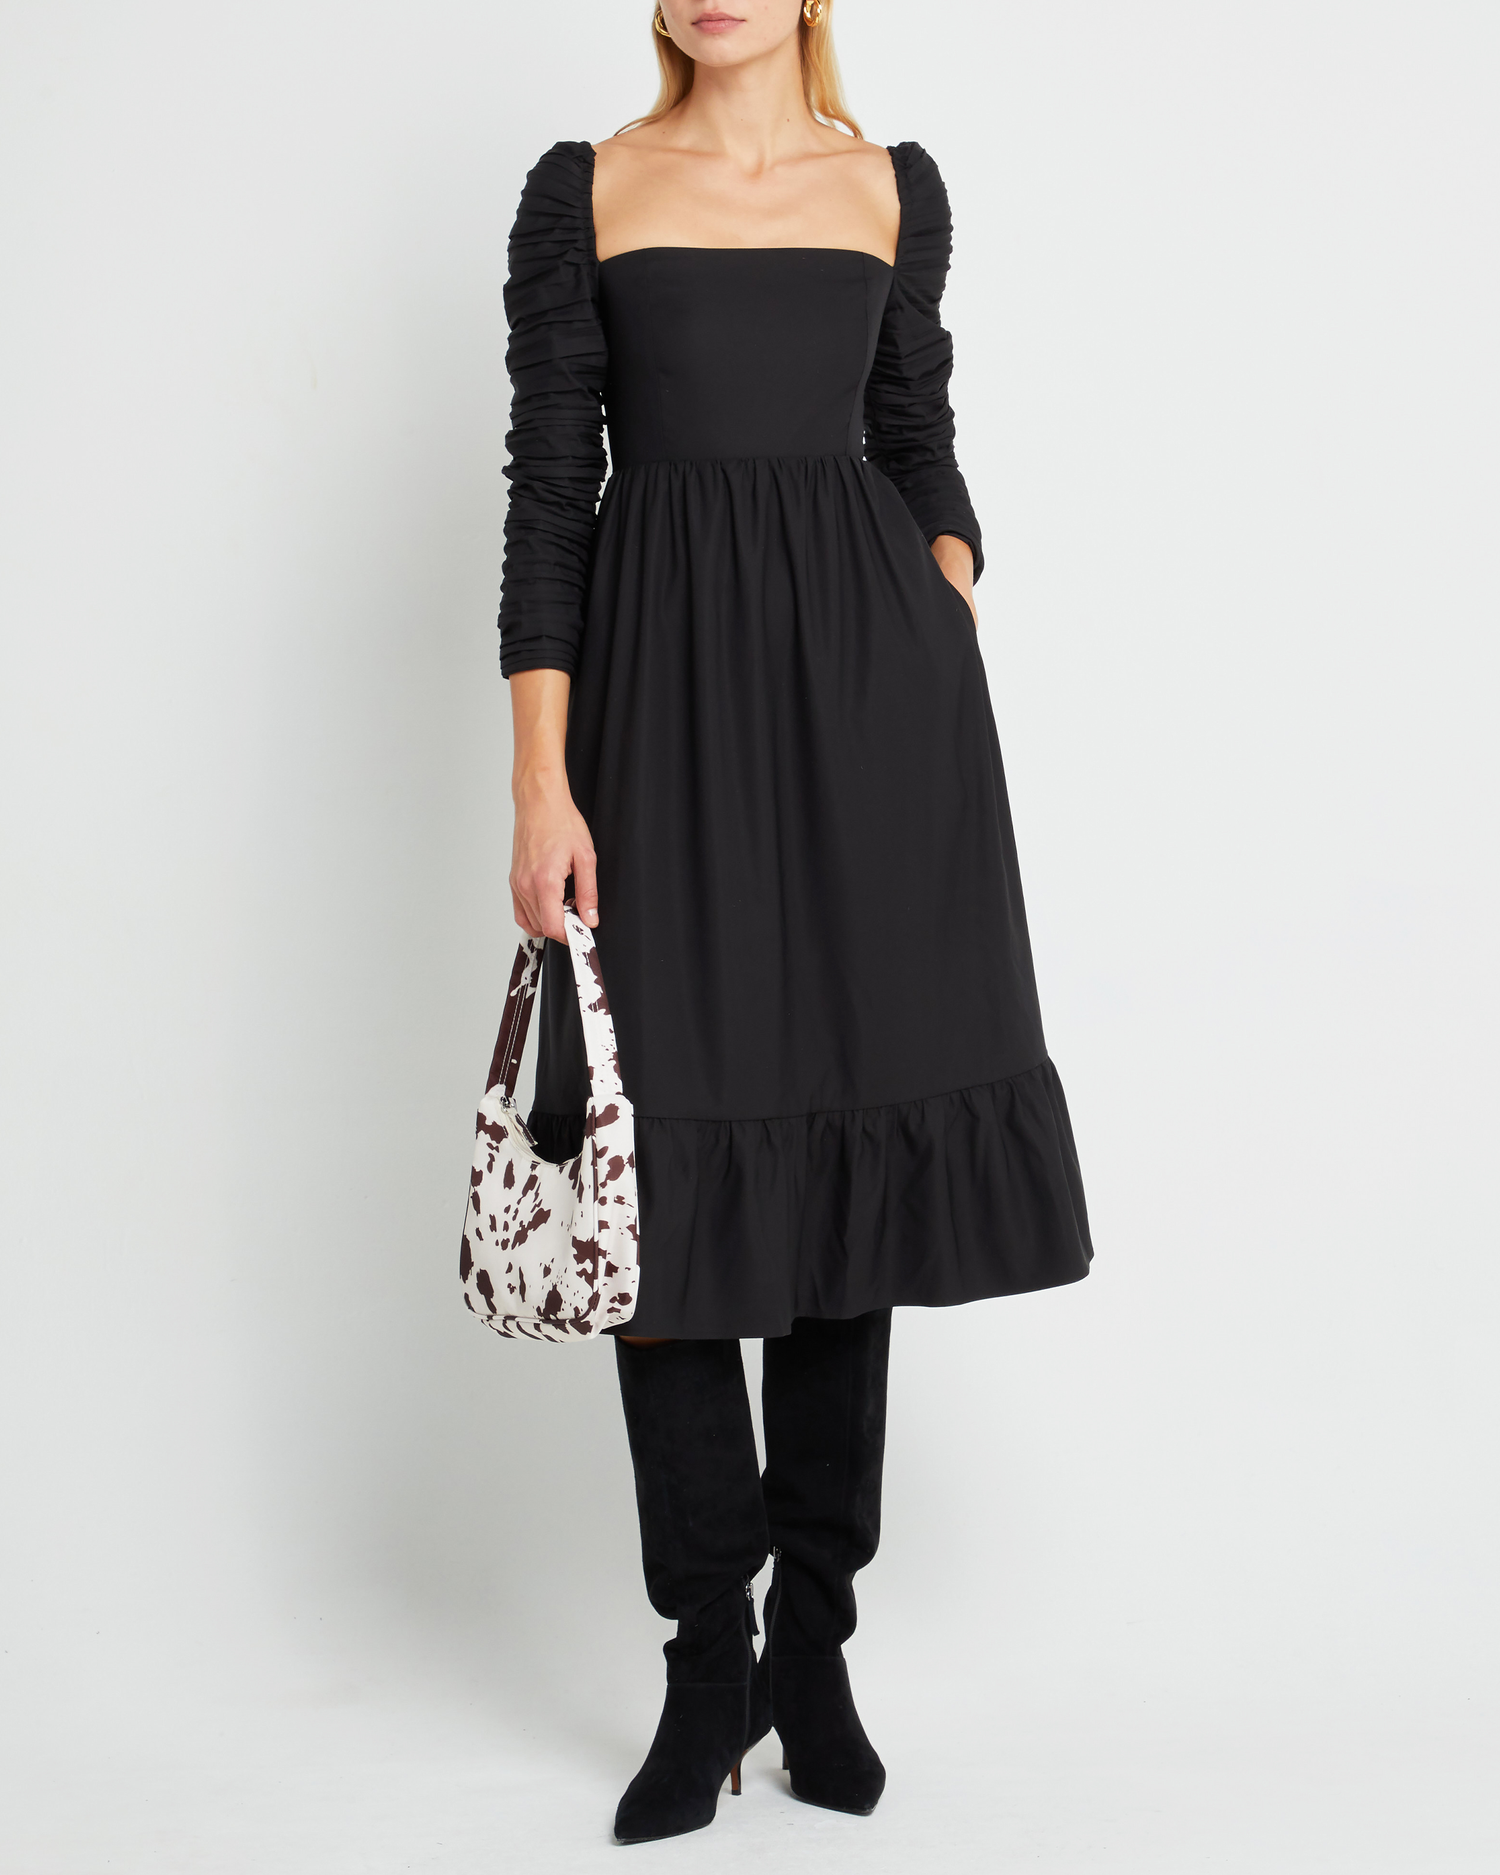 First image of Bonnie Dress, a black midi dress, midi sleeves, 3/4 sleeves, square neckline, pockets, ruched